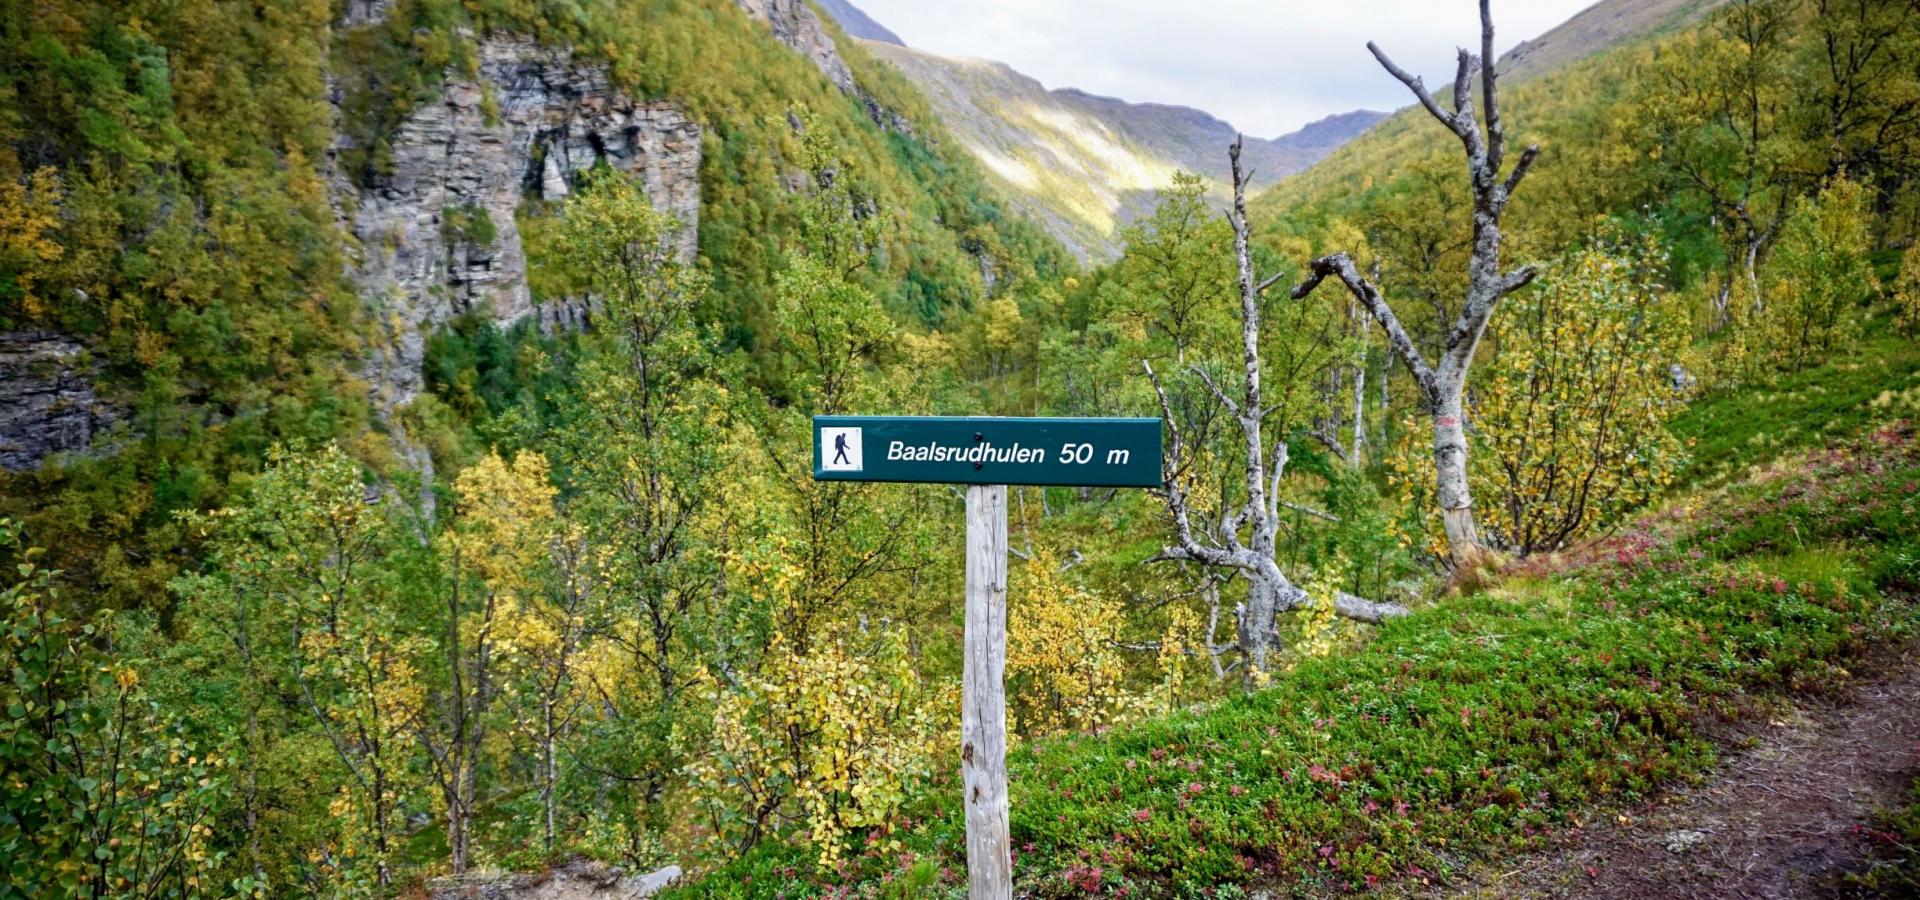 Signpost with "Baalsrudhula 50m" in a green valley